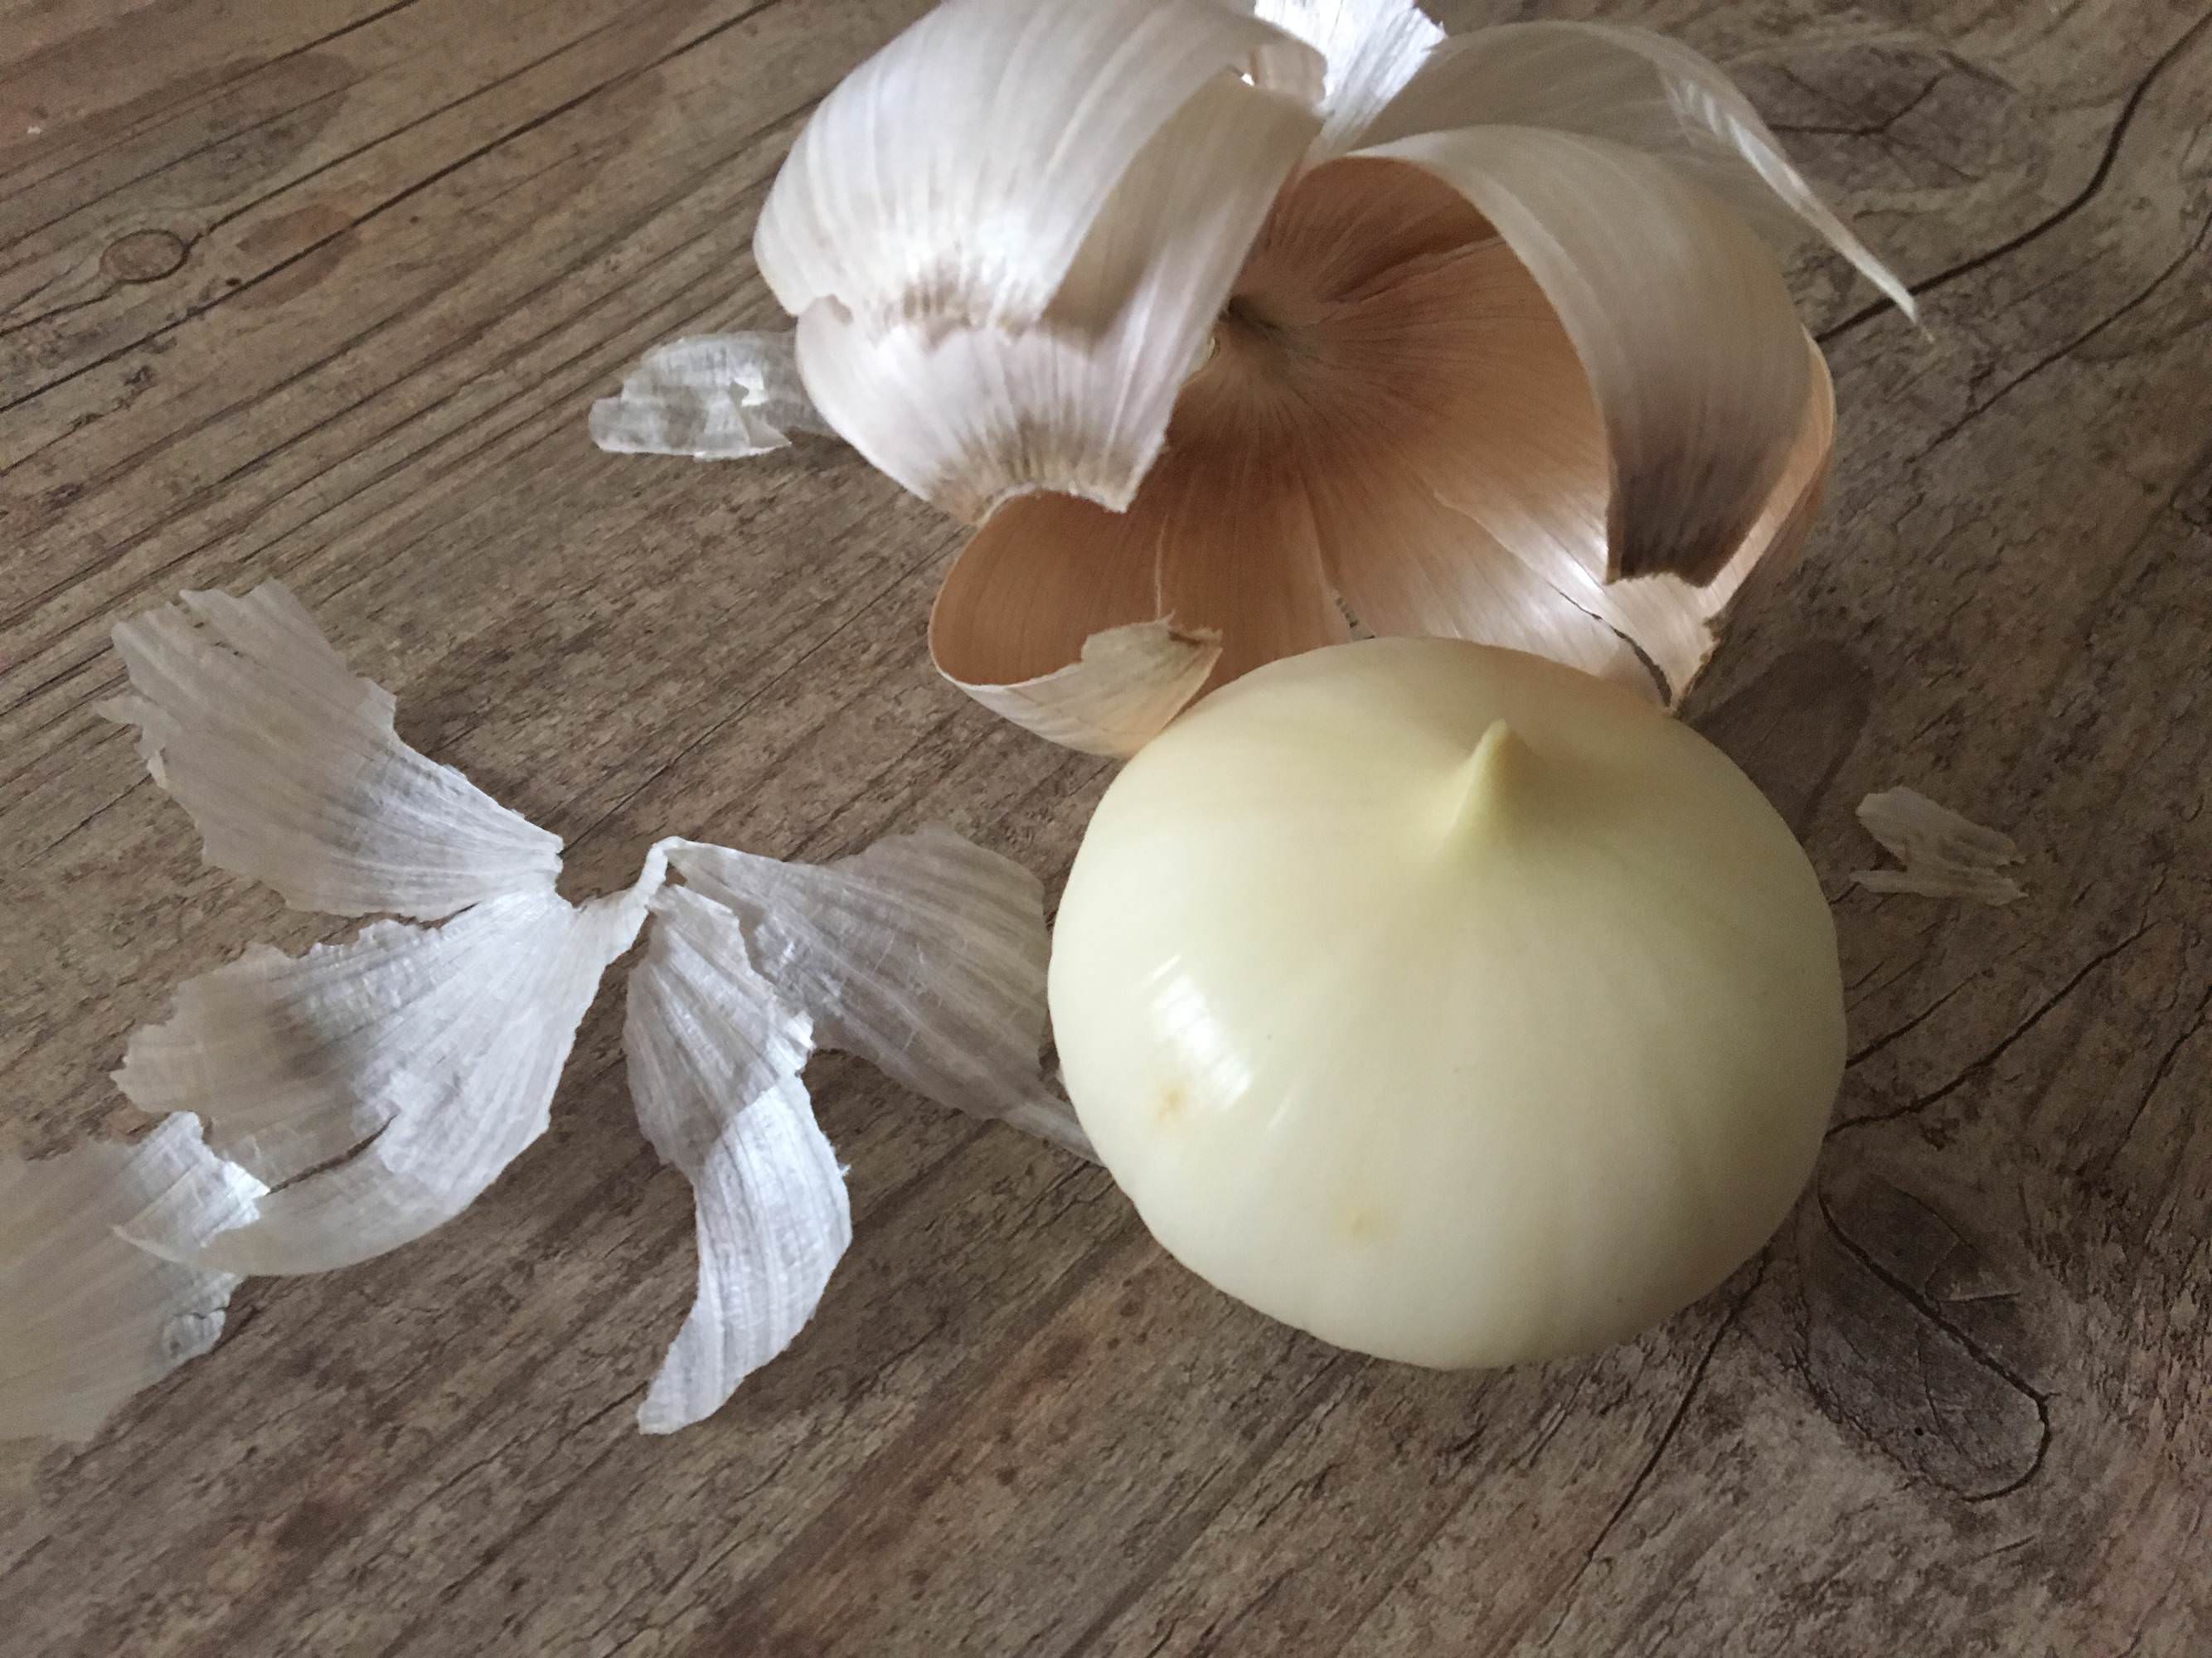 This garlic I bought doesn't have separate cloves, it's just one ...